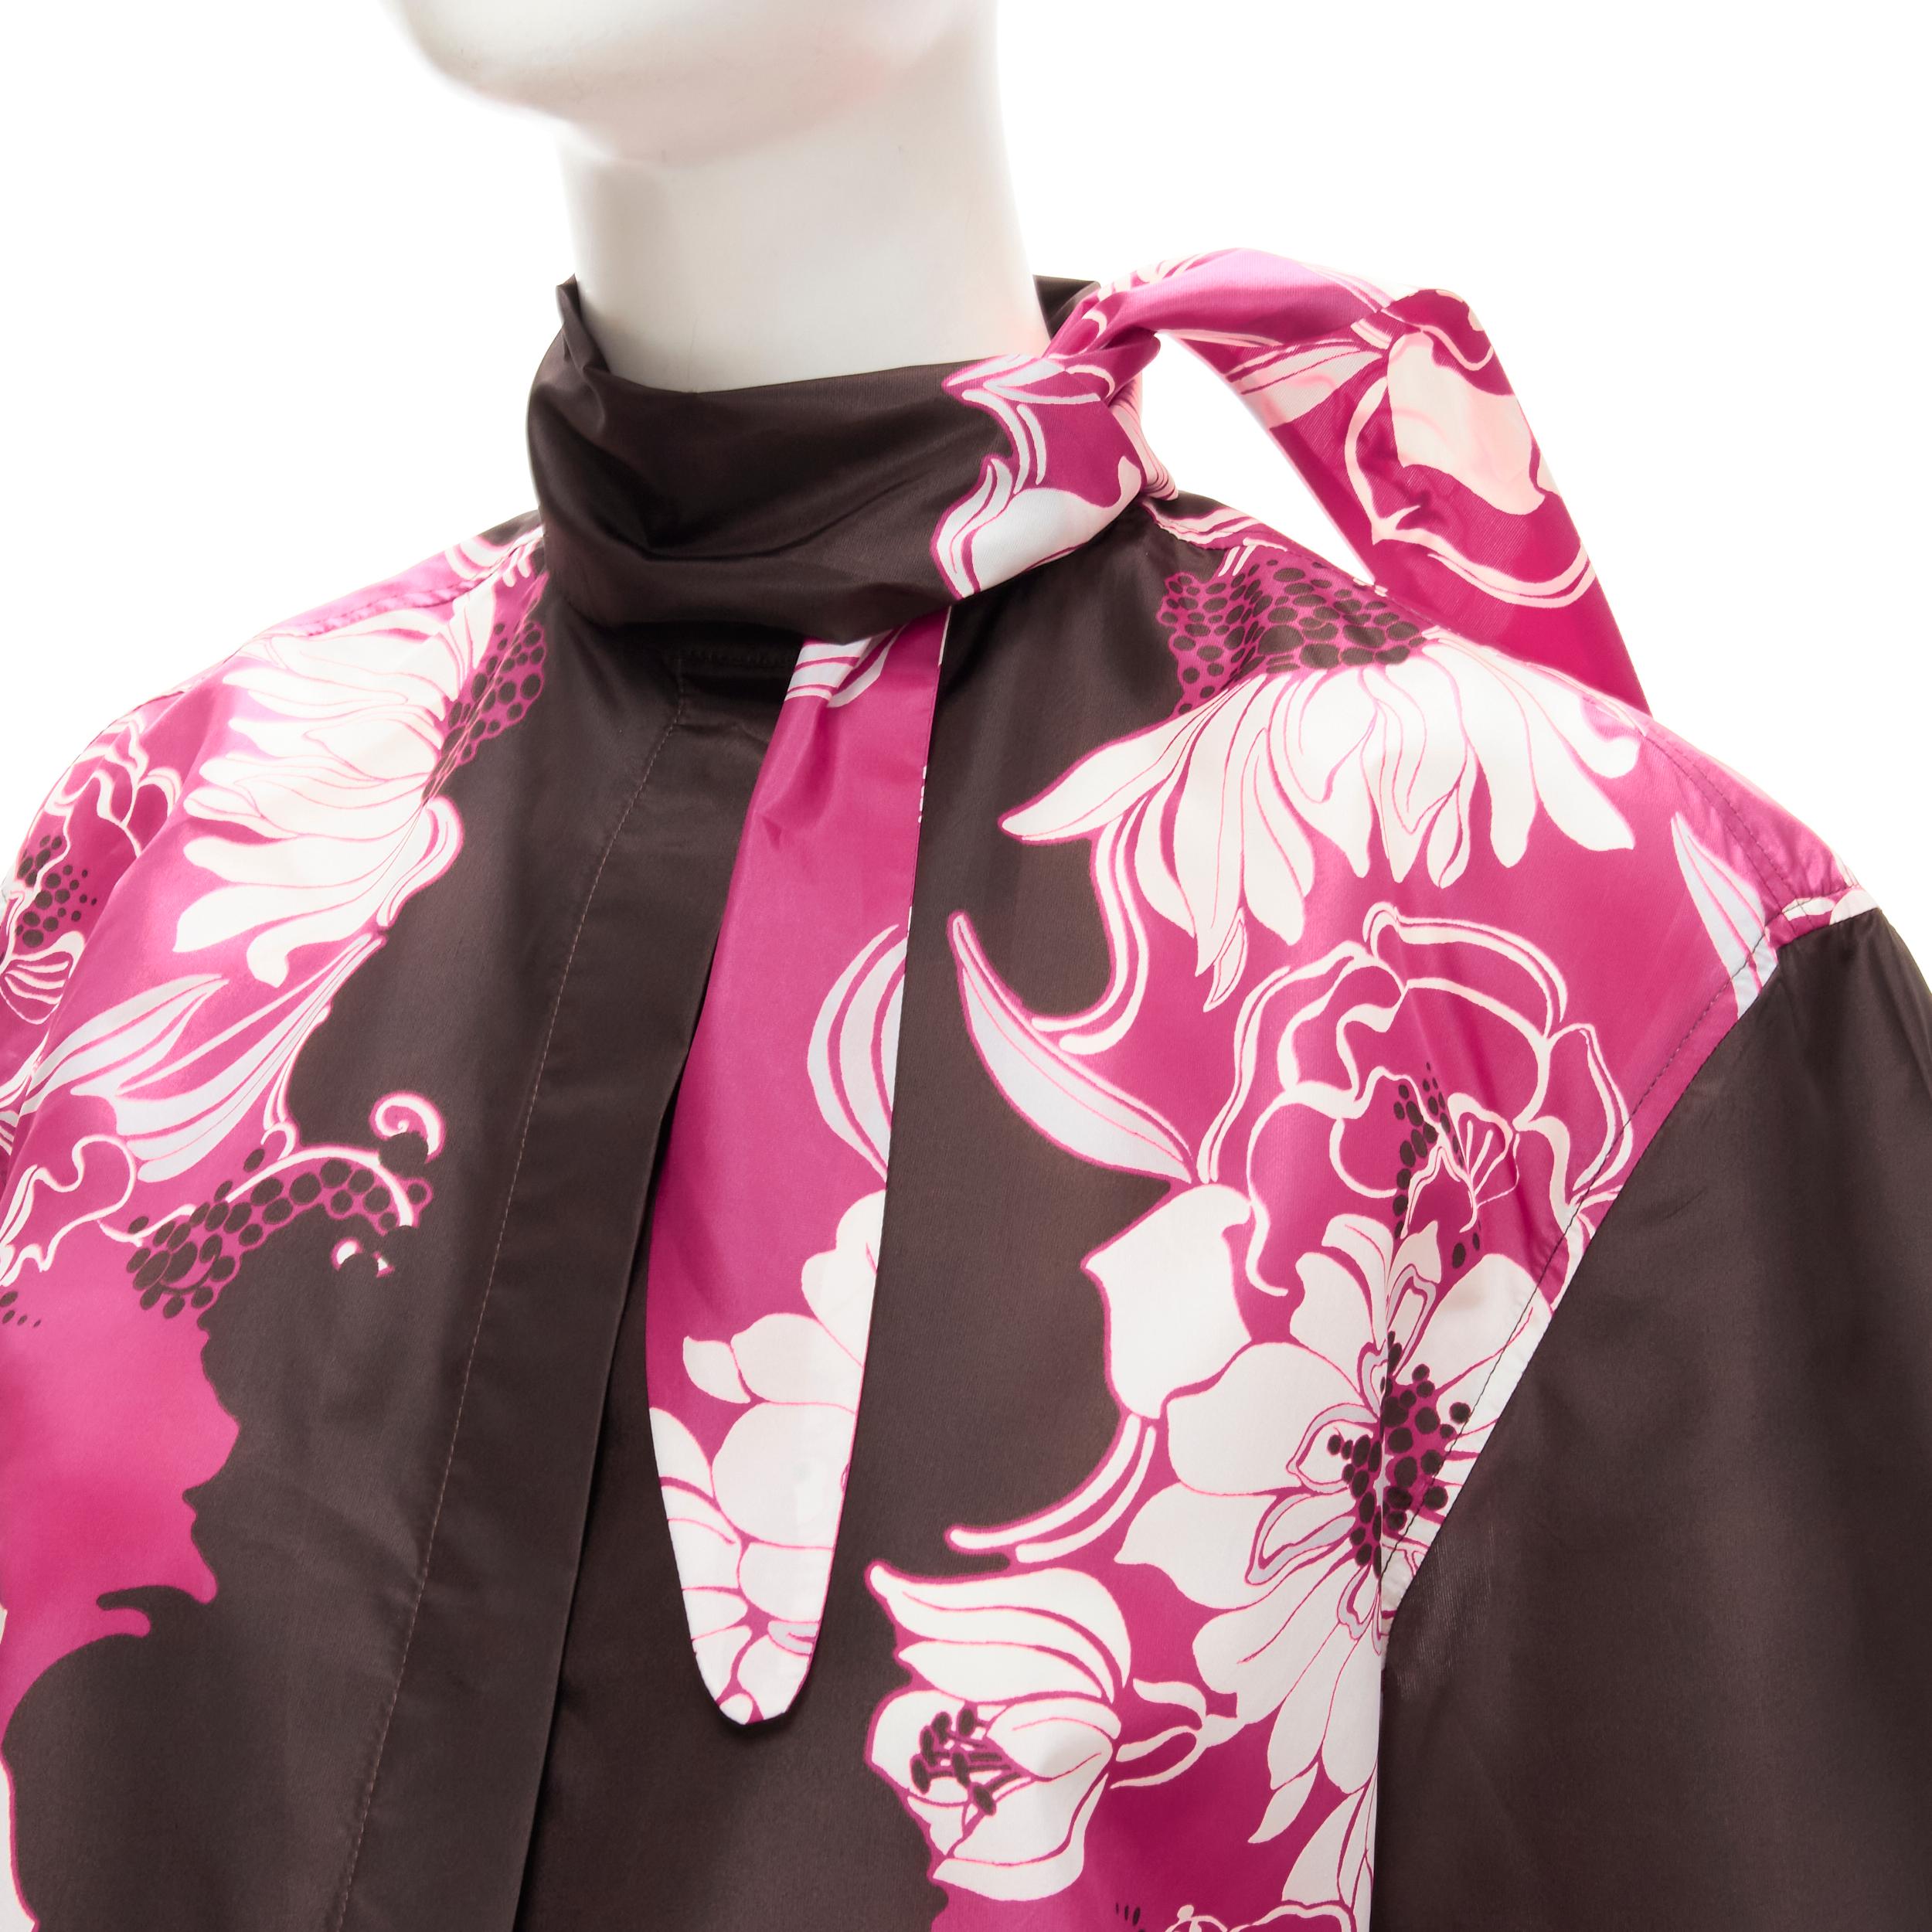 VALENTINO 2022 100% silk taffeta brown floral print shirt IT38 XS
Brand: Valentino
Material: 100% Silk
Color: Brown
Pattern: Floral
Closure: Button
Extra Detail: Scarf tie collar detail. Stiff cuffed sleeves. Boxy fit.
Made in: